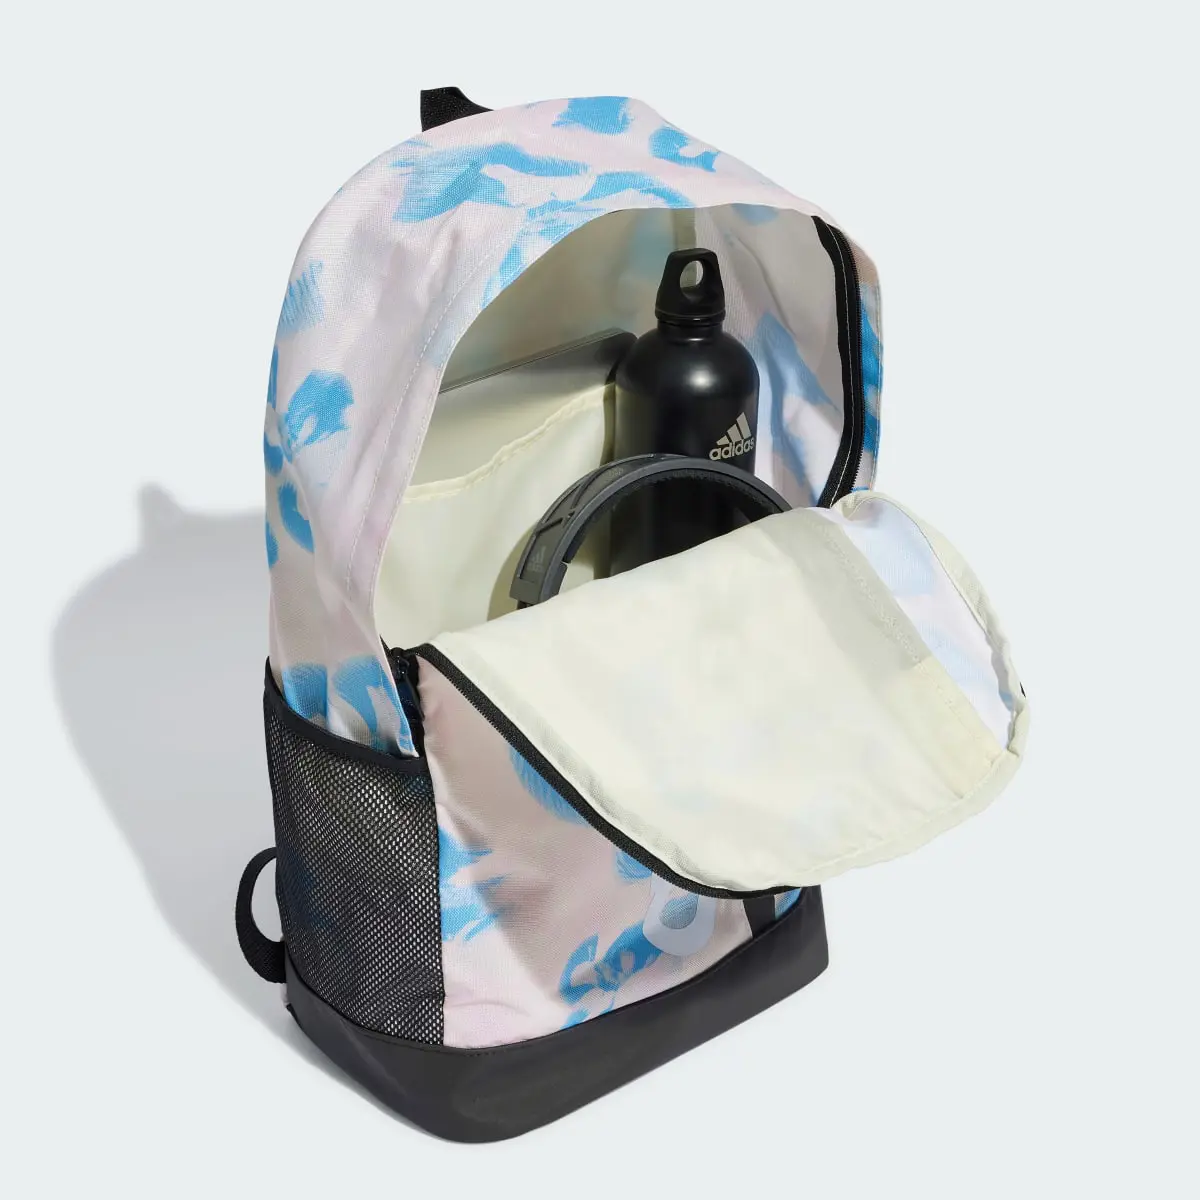 Adidas Linear Graphic Backpack. 3